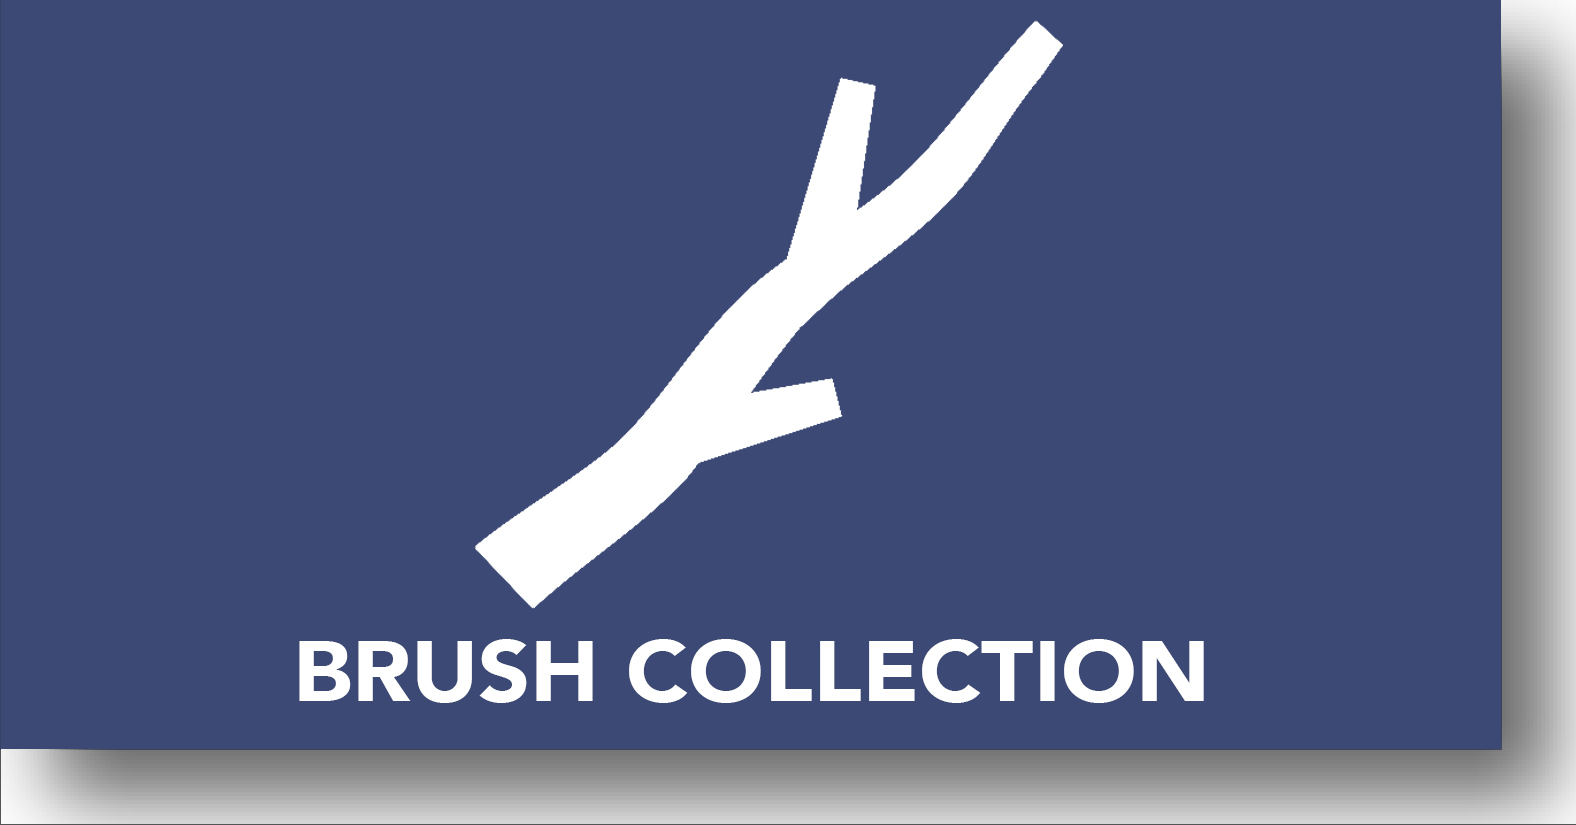 Brush Collection